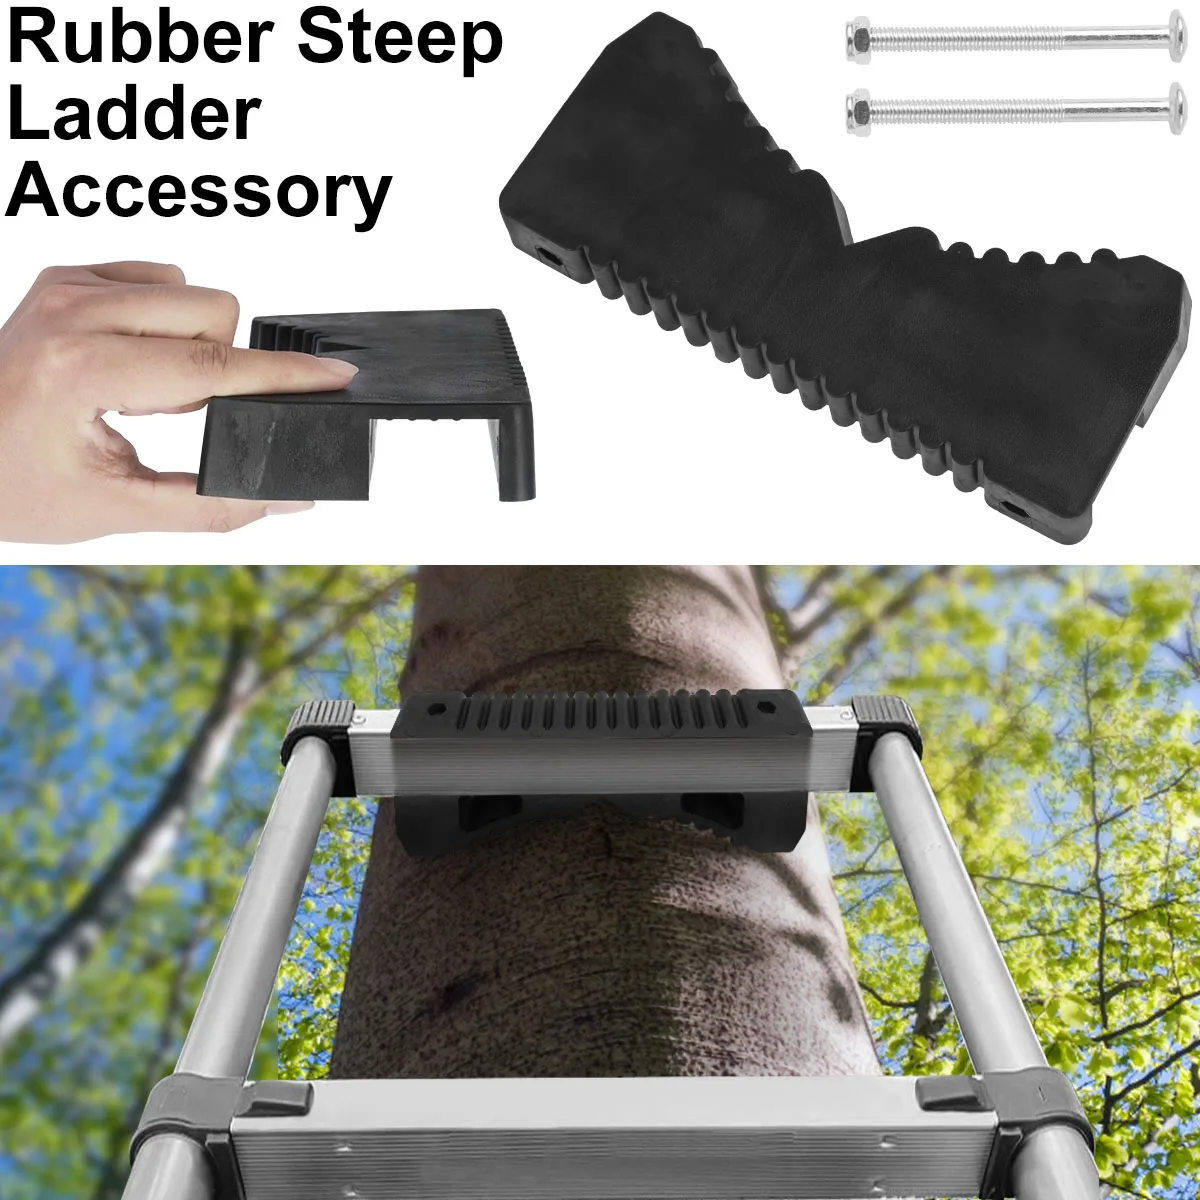 

Rubber Steep Ladder Accessory Anti-Slip Ladder Stabilizer with 2 Screws Sturdy Ladder Rail Scratch Protection Rubber Durable